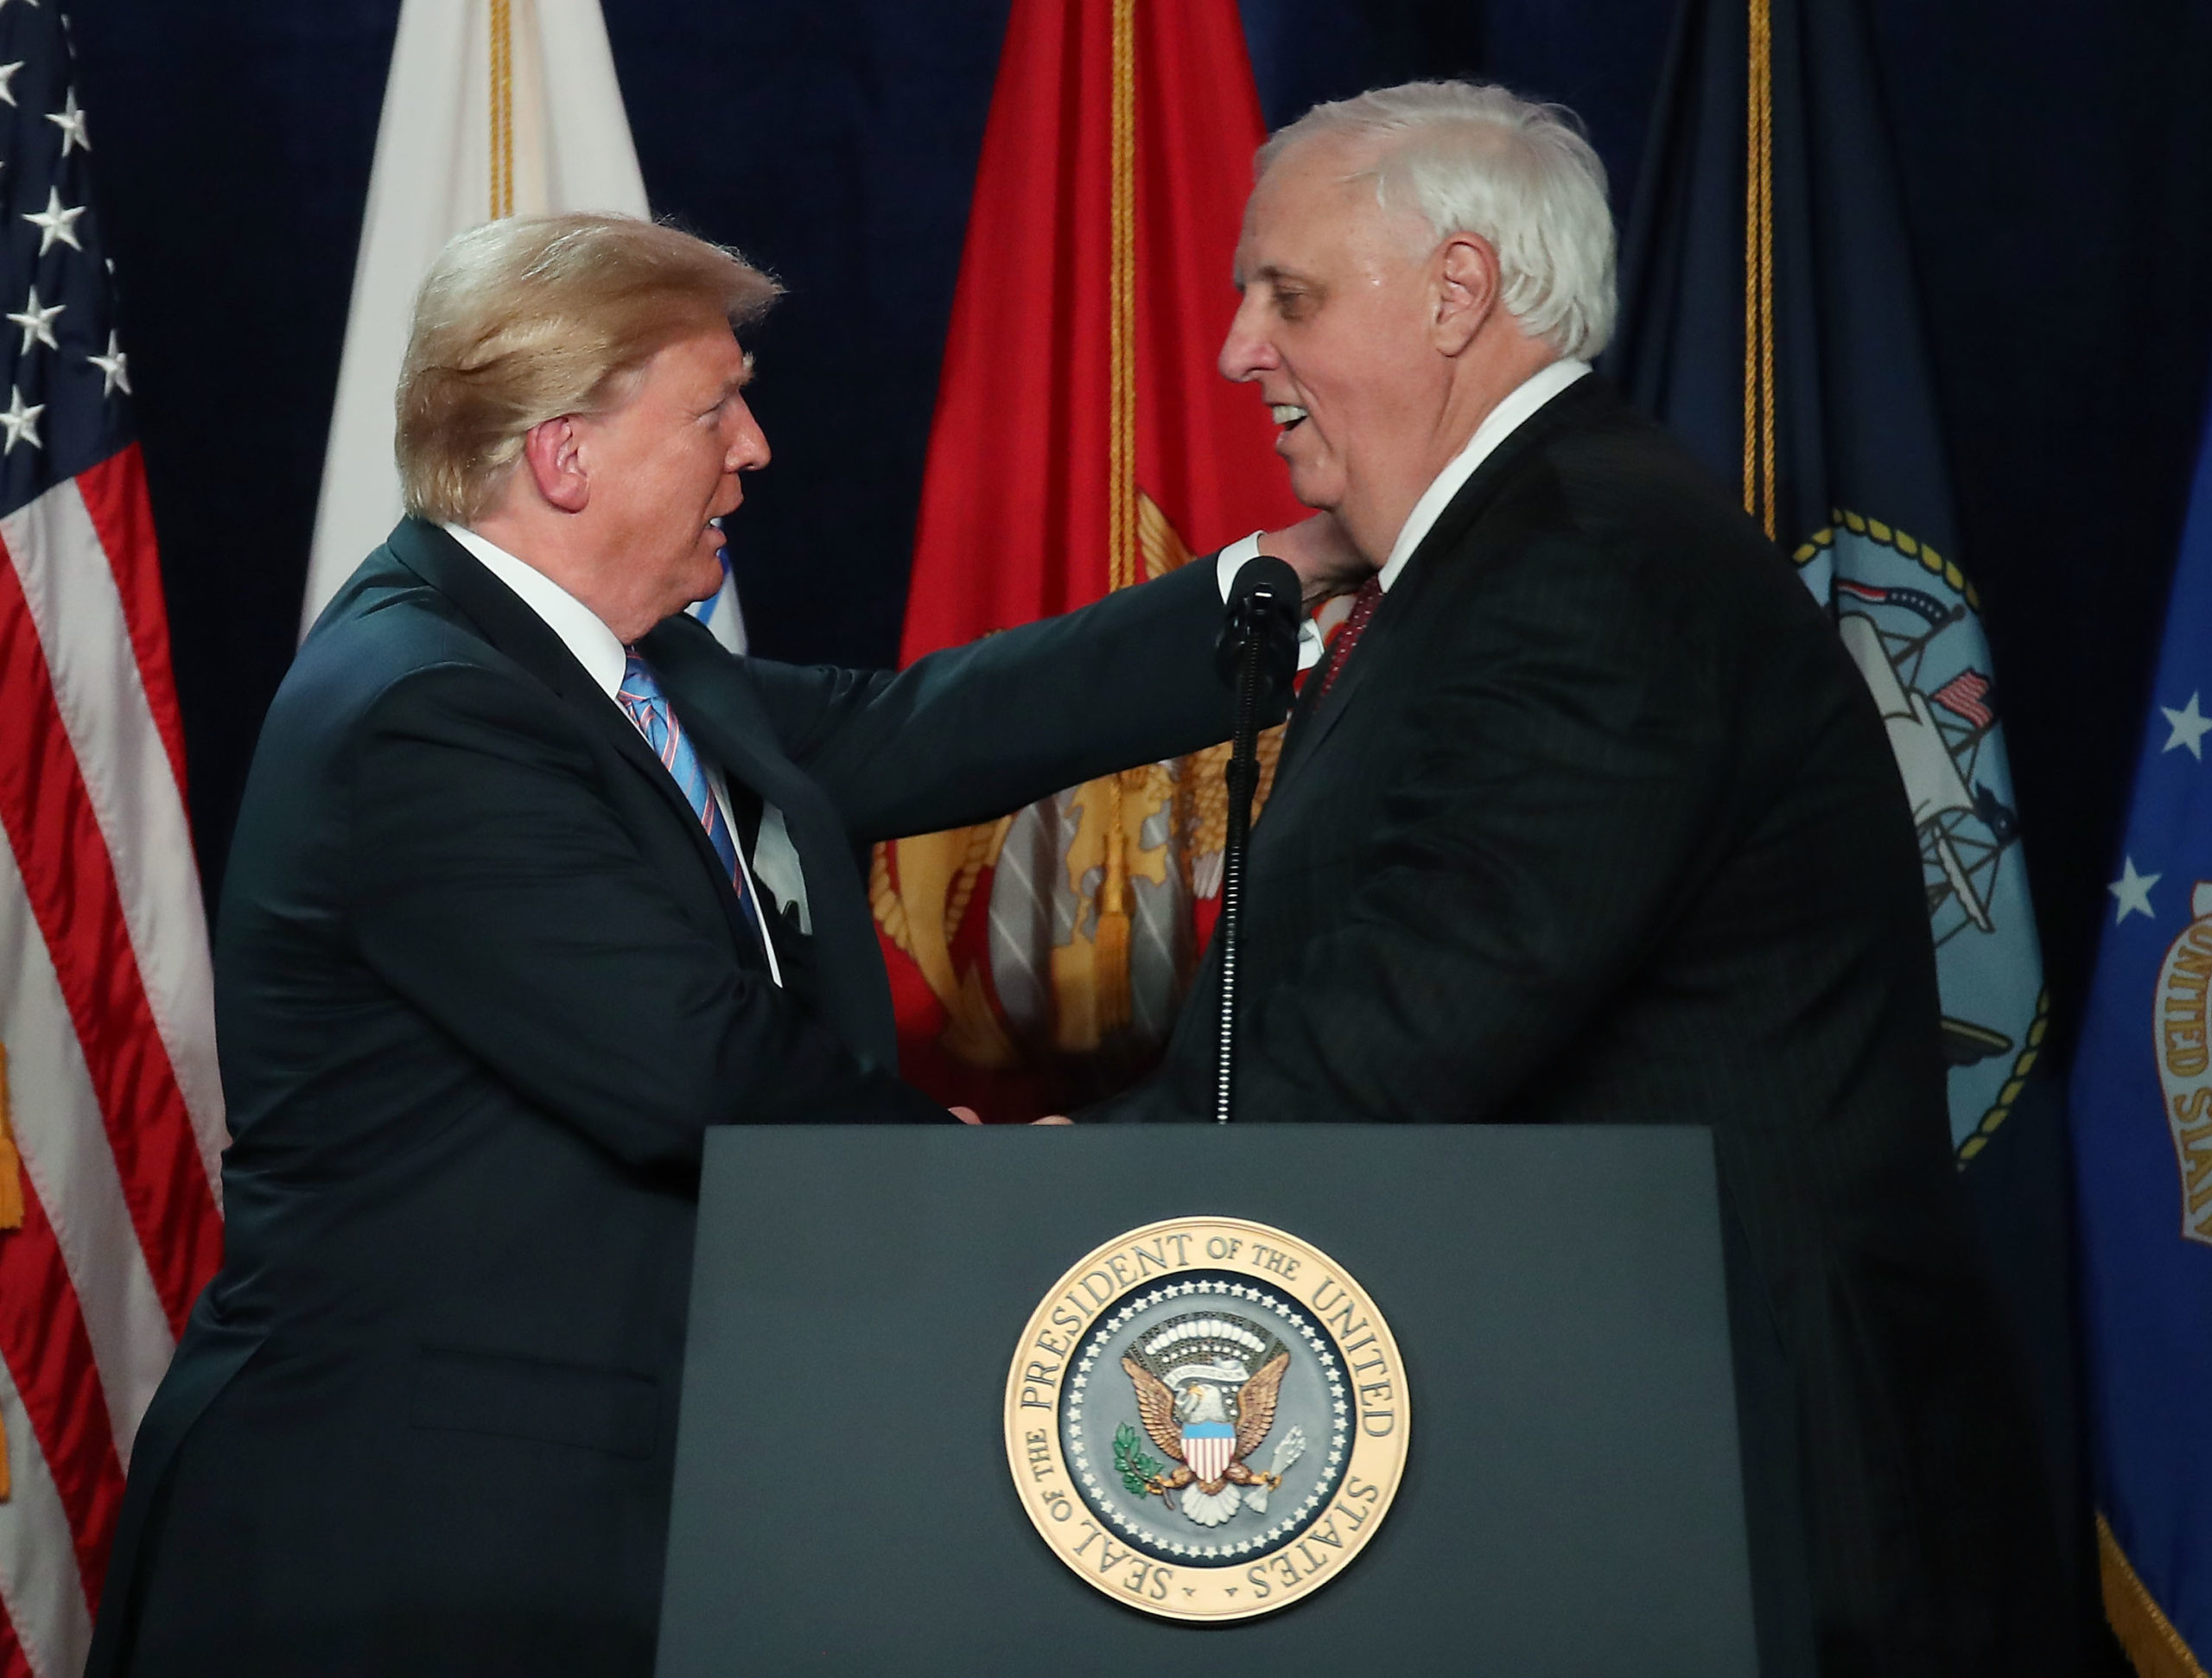 WHITE SULPHUR SPRINGS, WV - JULY 03: U.S. President Donald Trump is introduced by West Virginia Gov. Jim Justice (R) during a salute to service dinner at the Greenbrier Resort on June 3, 2018 in White Sulphur Springs, West Virginia. The president was particpating in a military tribute on the eve of Independence Day. (Photo by Mark Wilson/Getty Images)